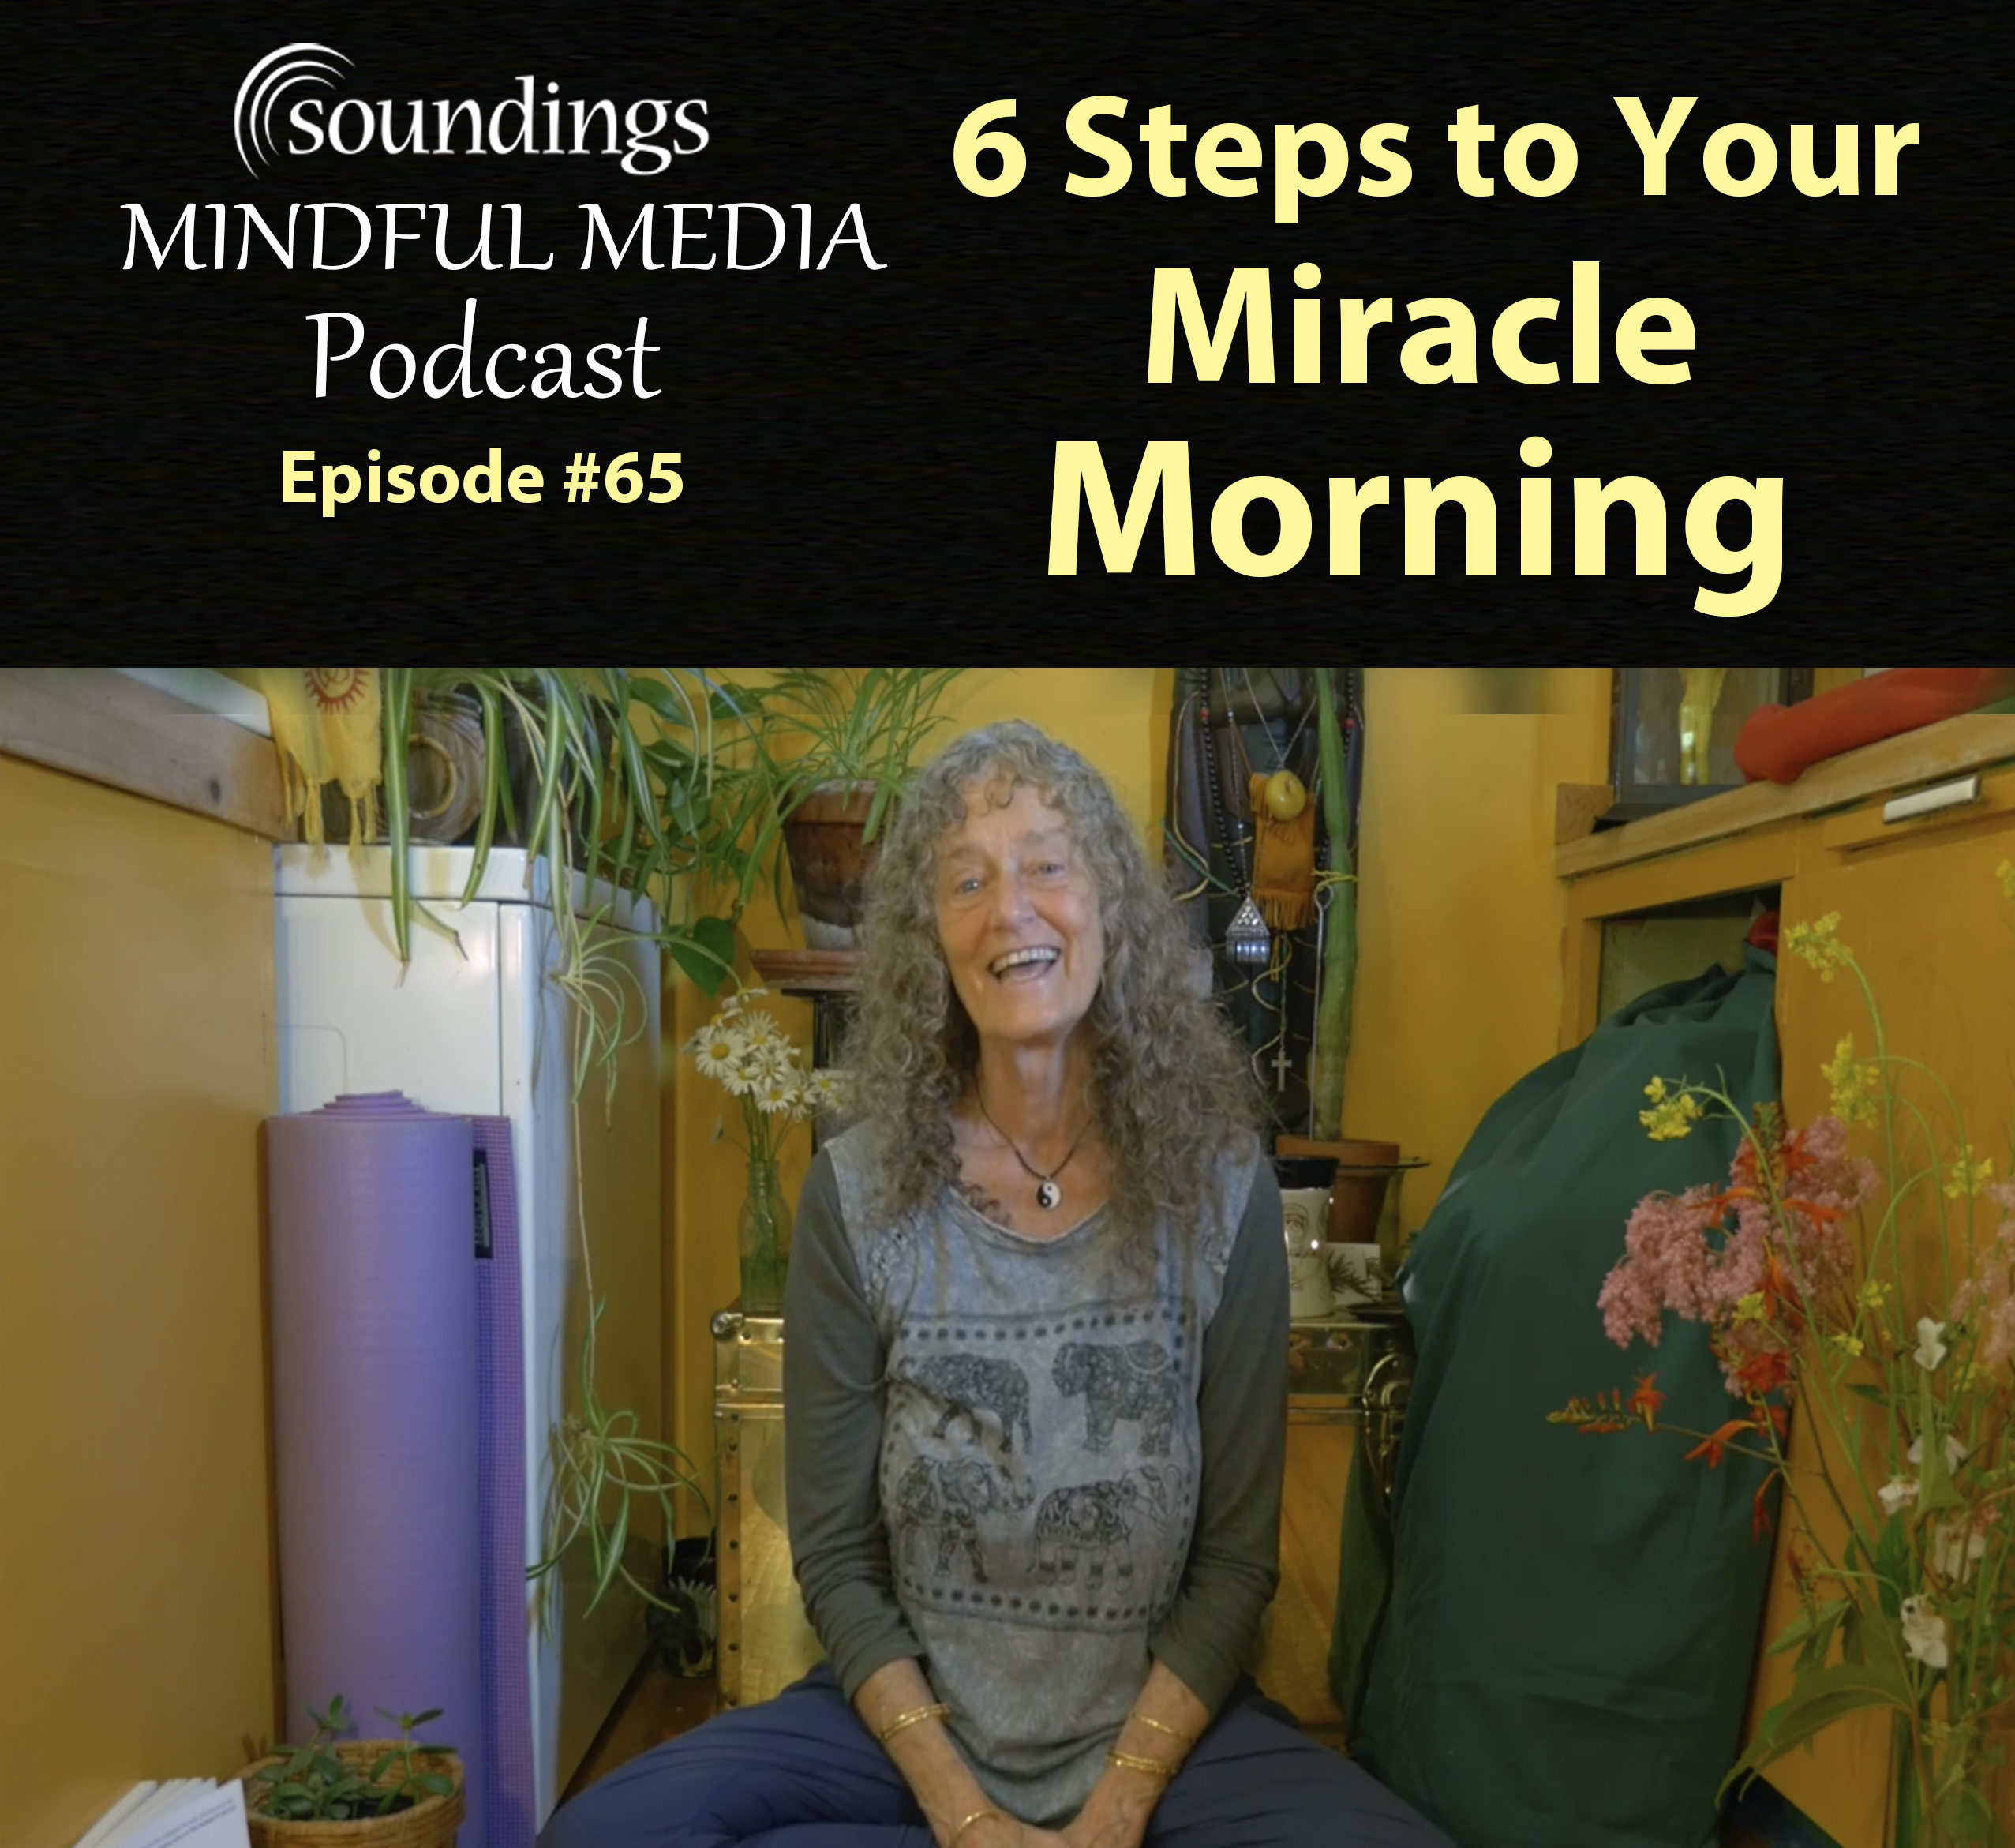 6 Steps to Your Miracle Morning on Soundings Mindful Media Podcast